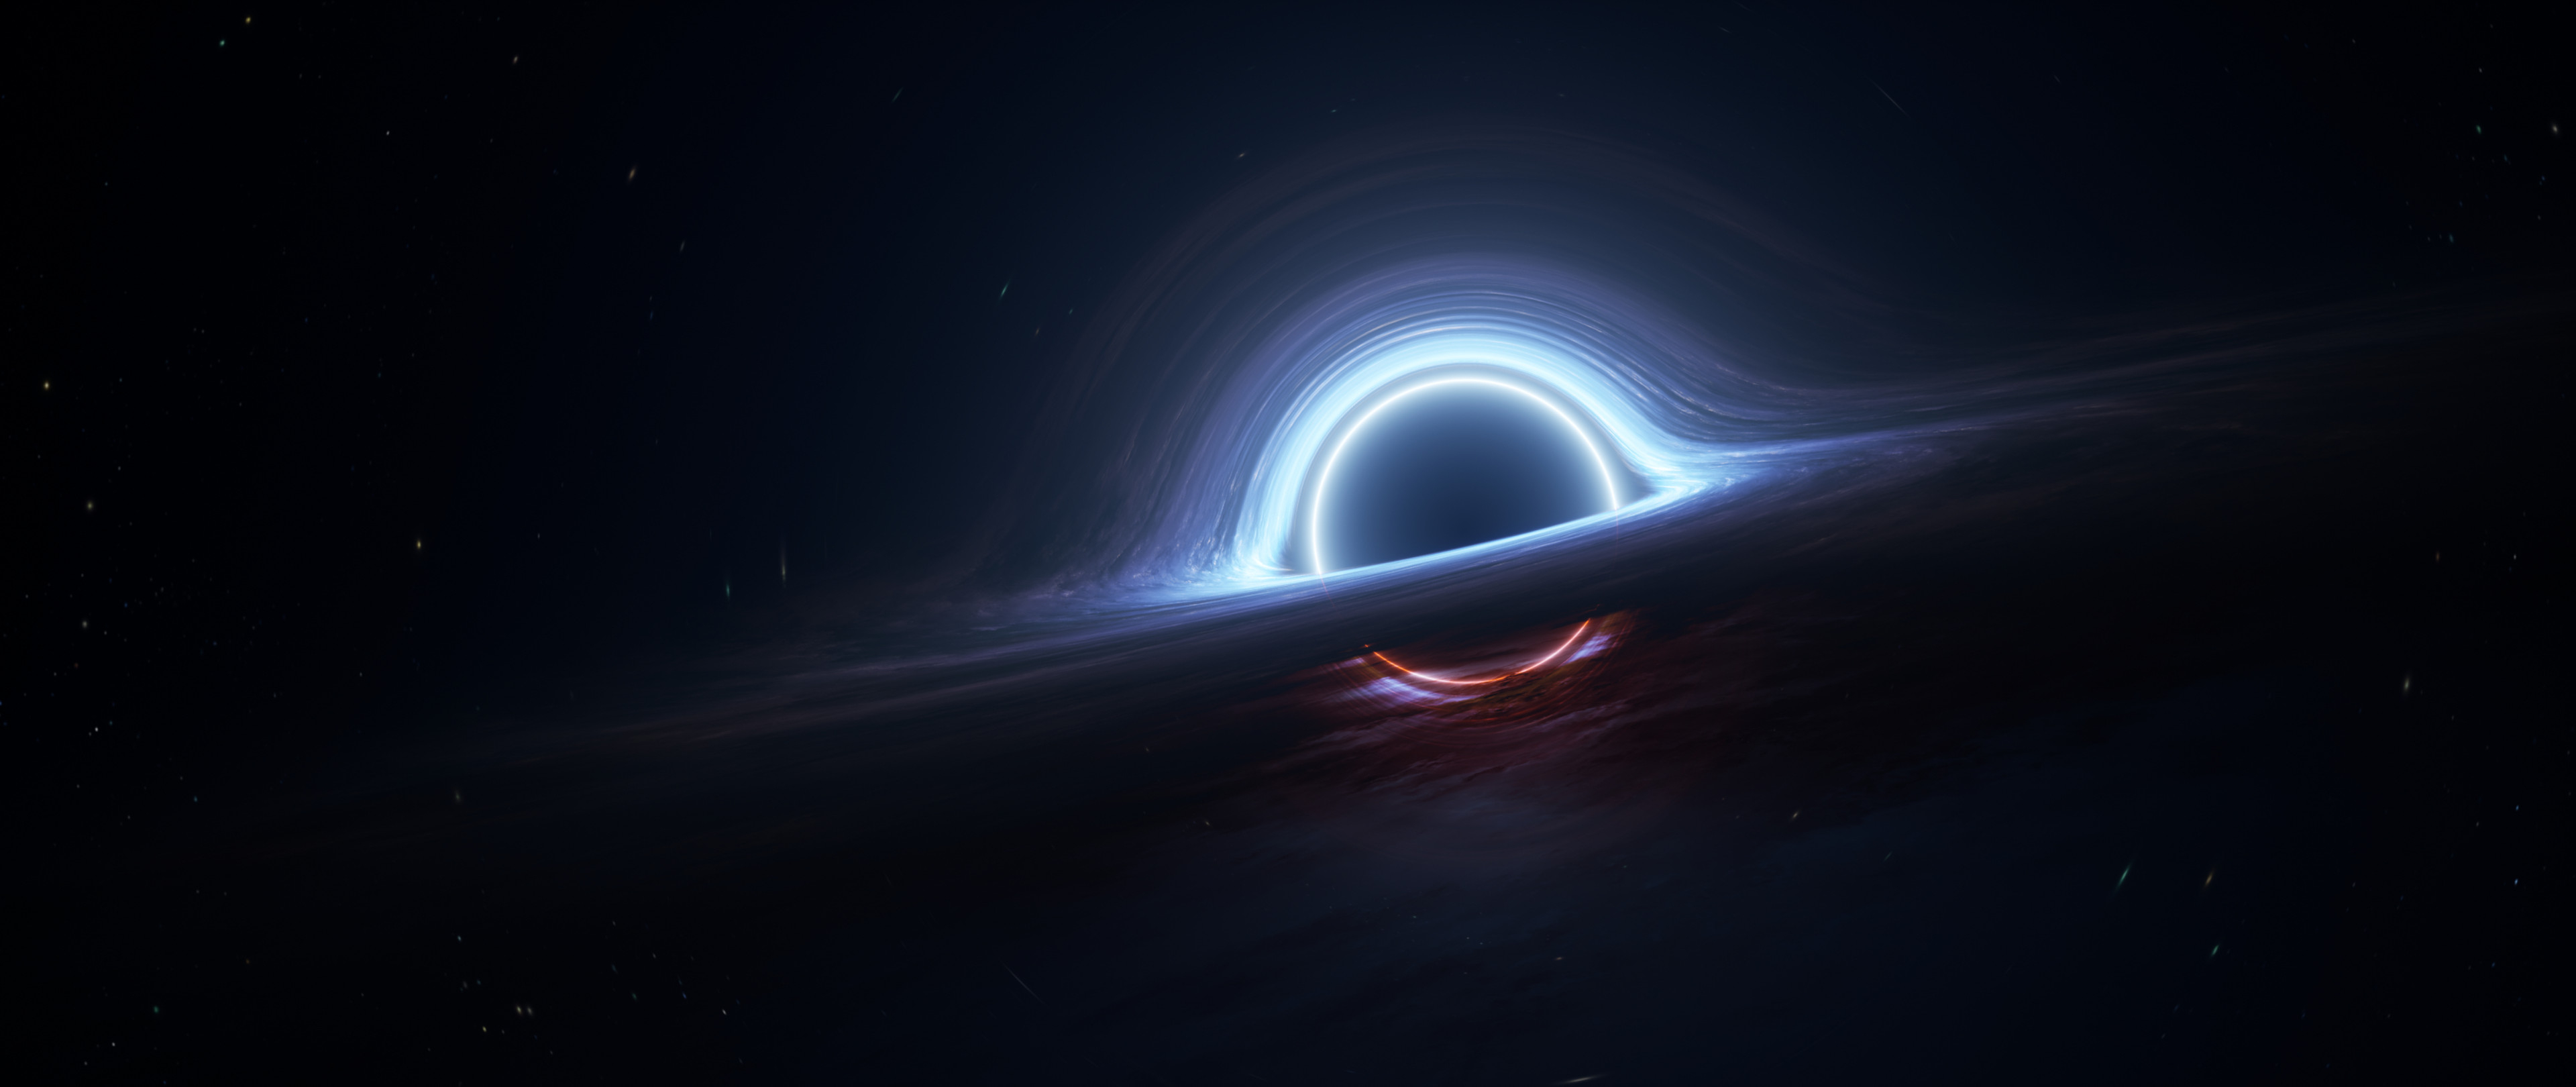 Black Hole HD Wallpapers | 4K Backgrounds - Wallpapers Den